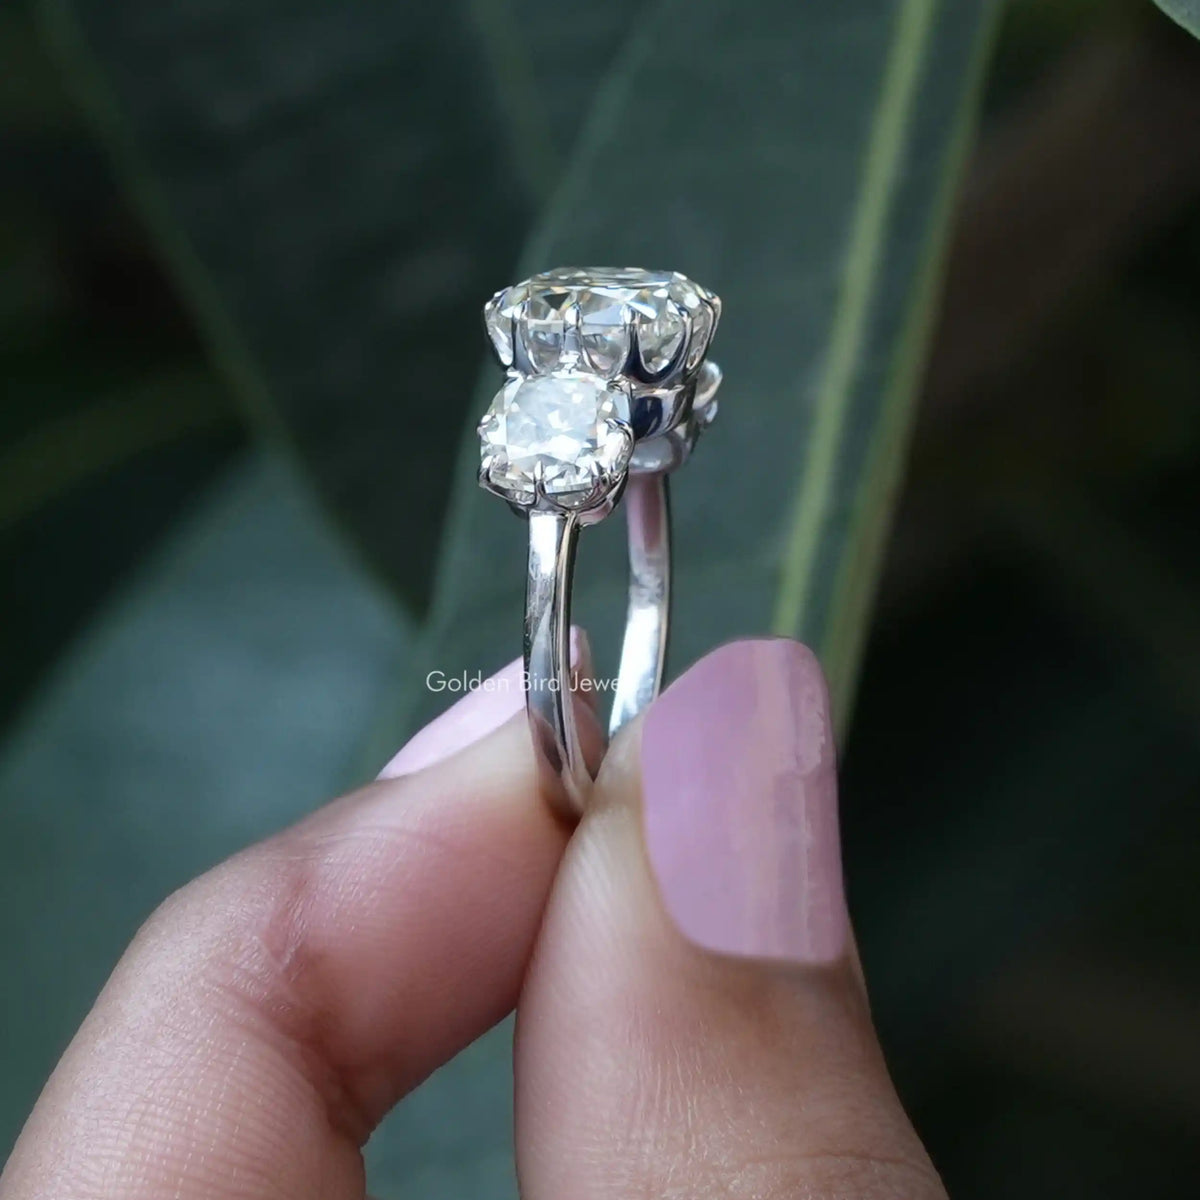 [Side view of old mine cushion cut moissanite ring made of 14k white gold]-[Golden Bird Jewels]